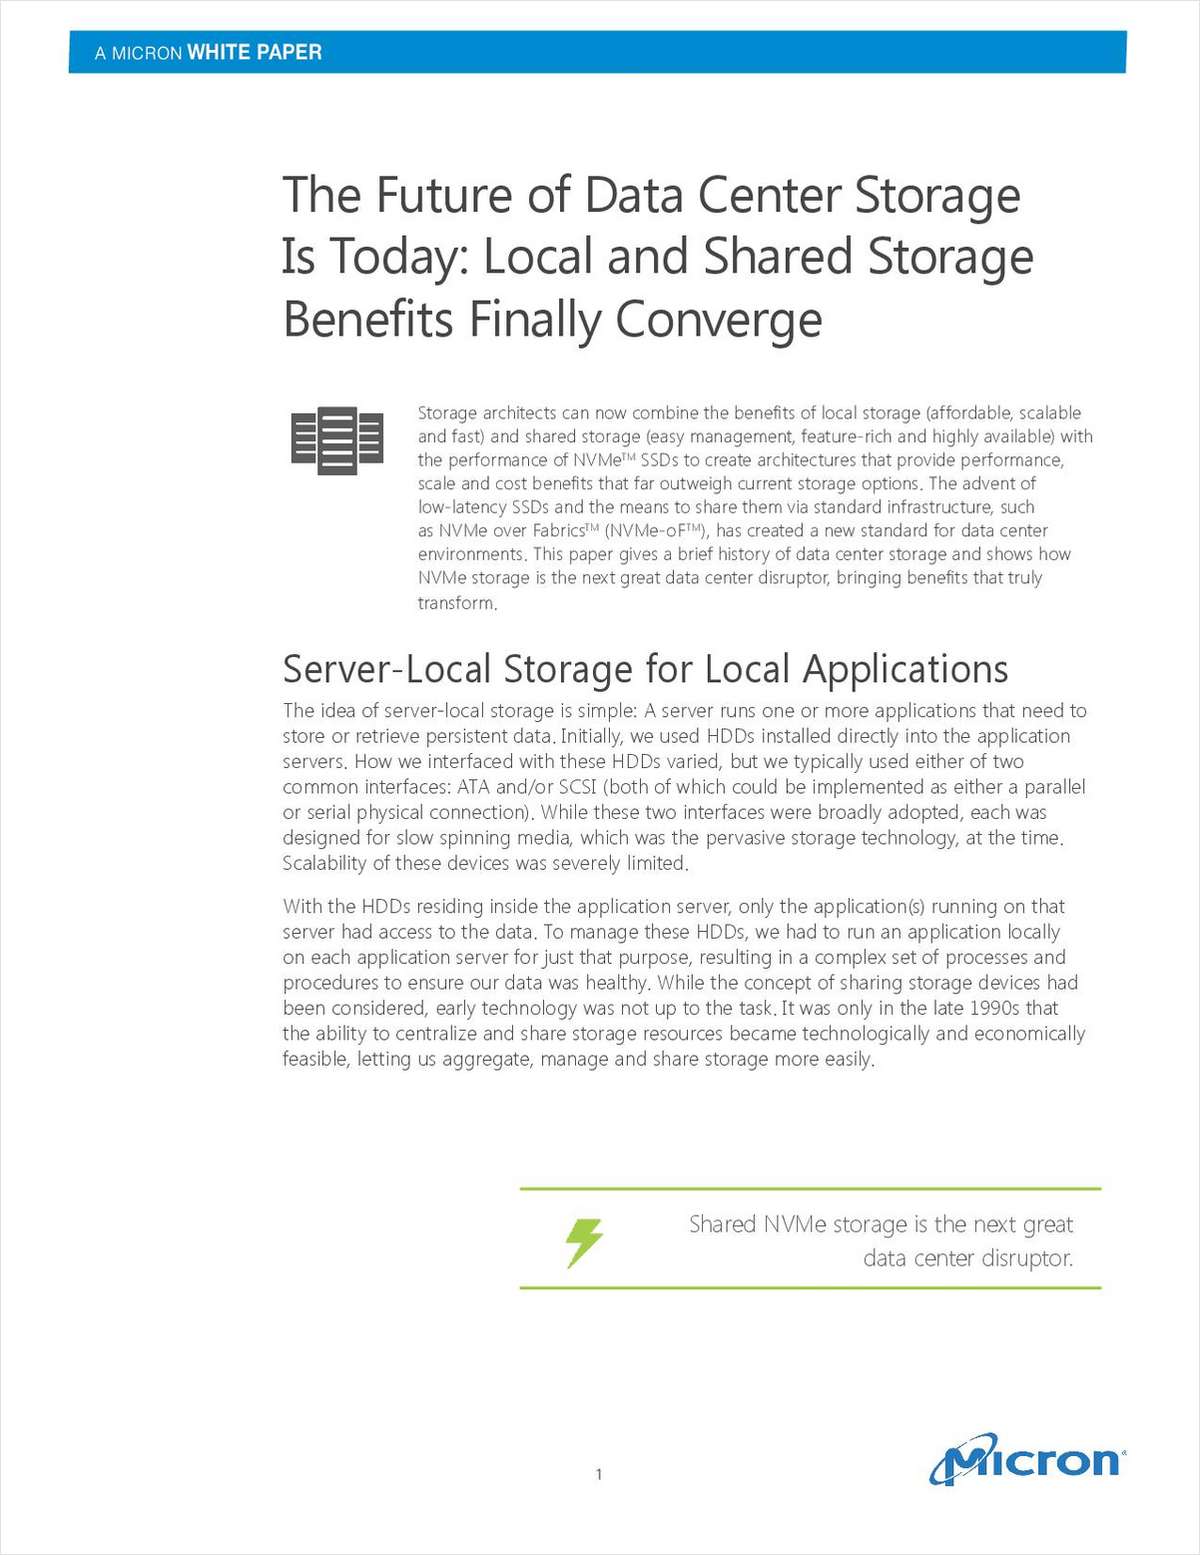 The Future of Data Center Storage is Today: Local and Shared Storage Benefits Finally Converge